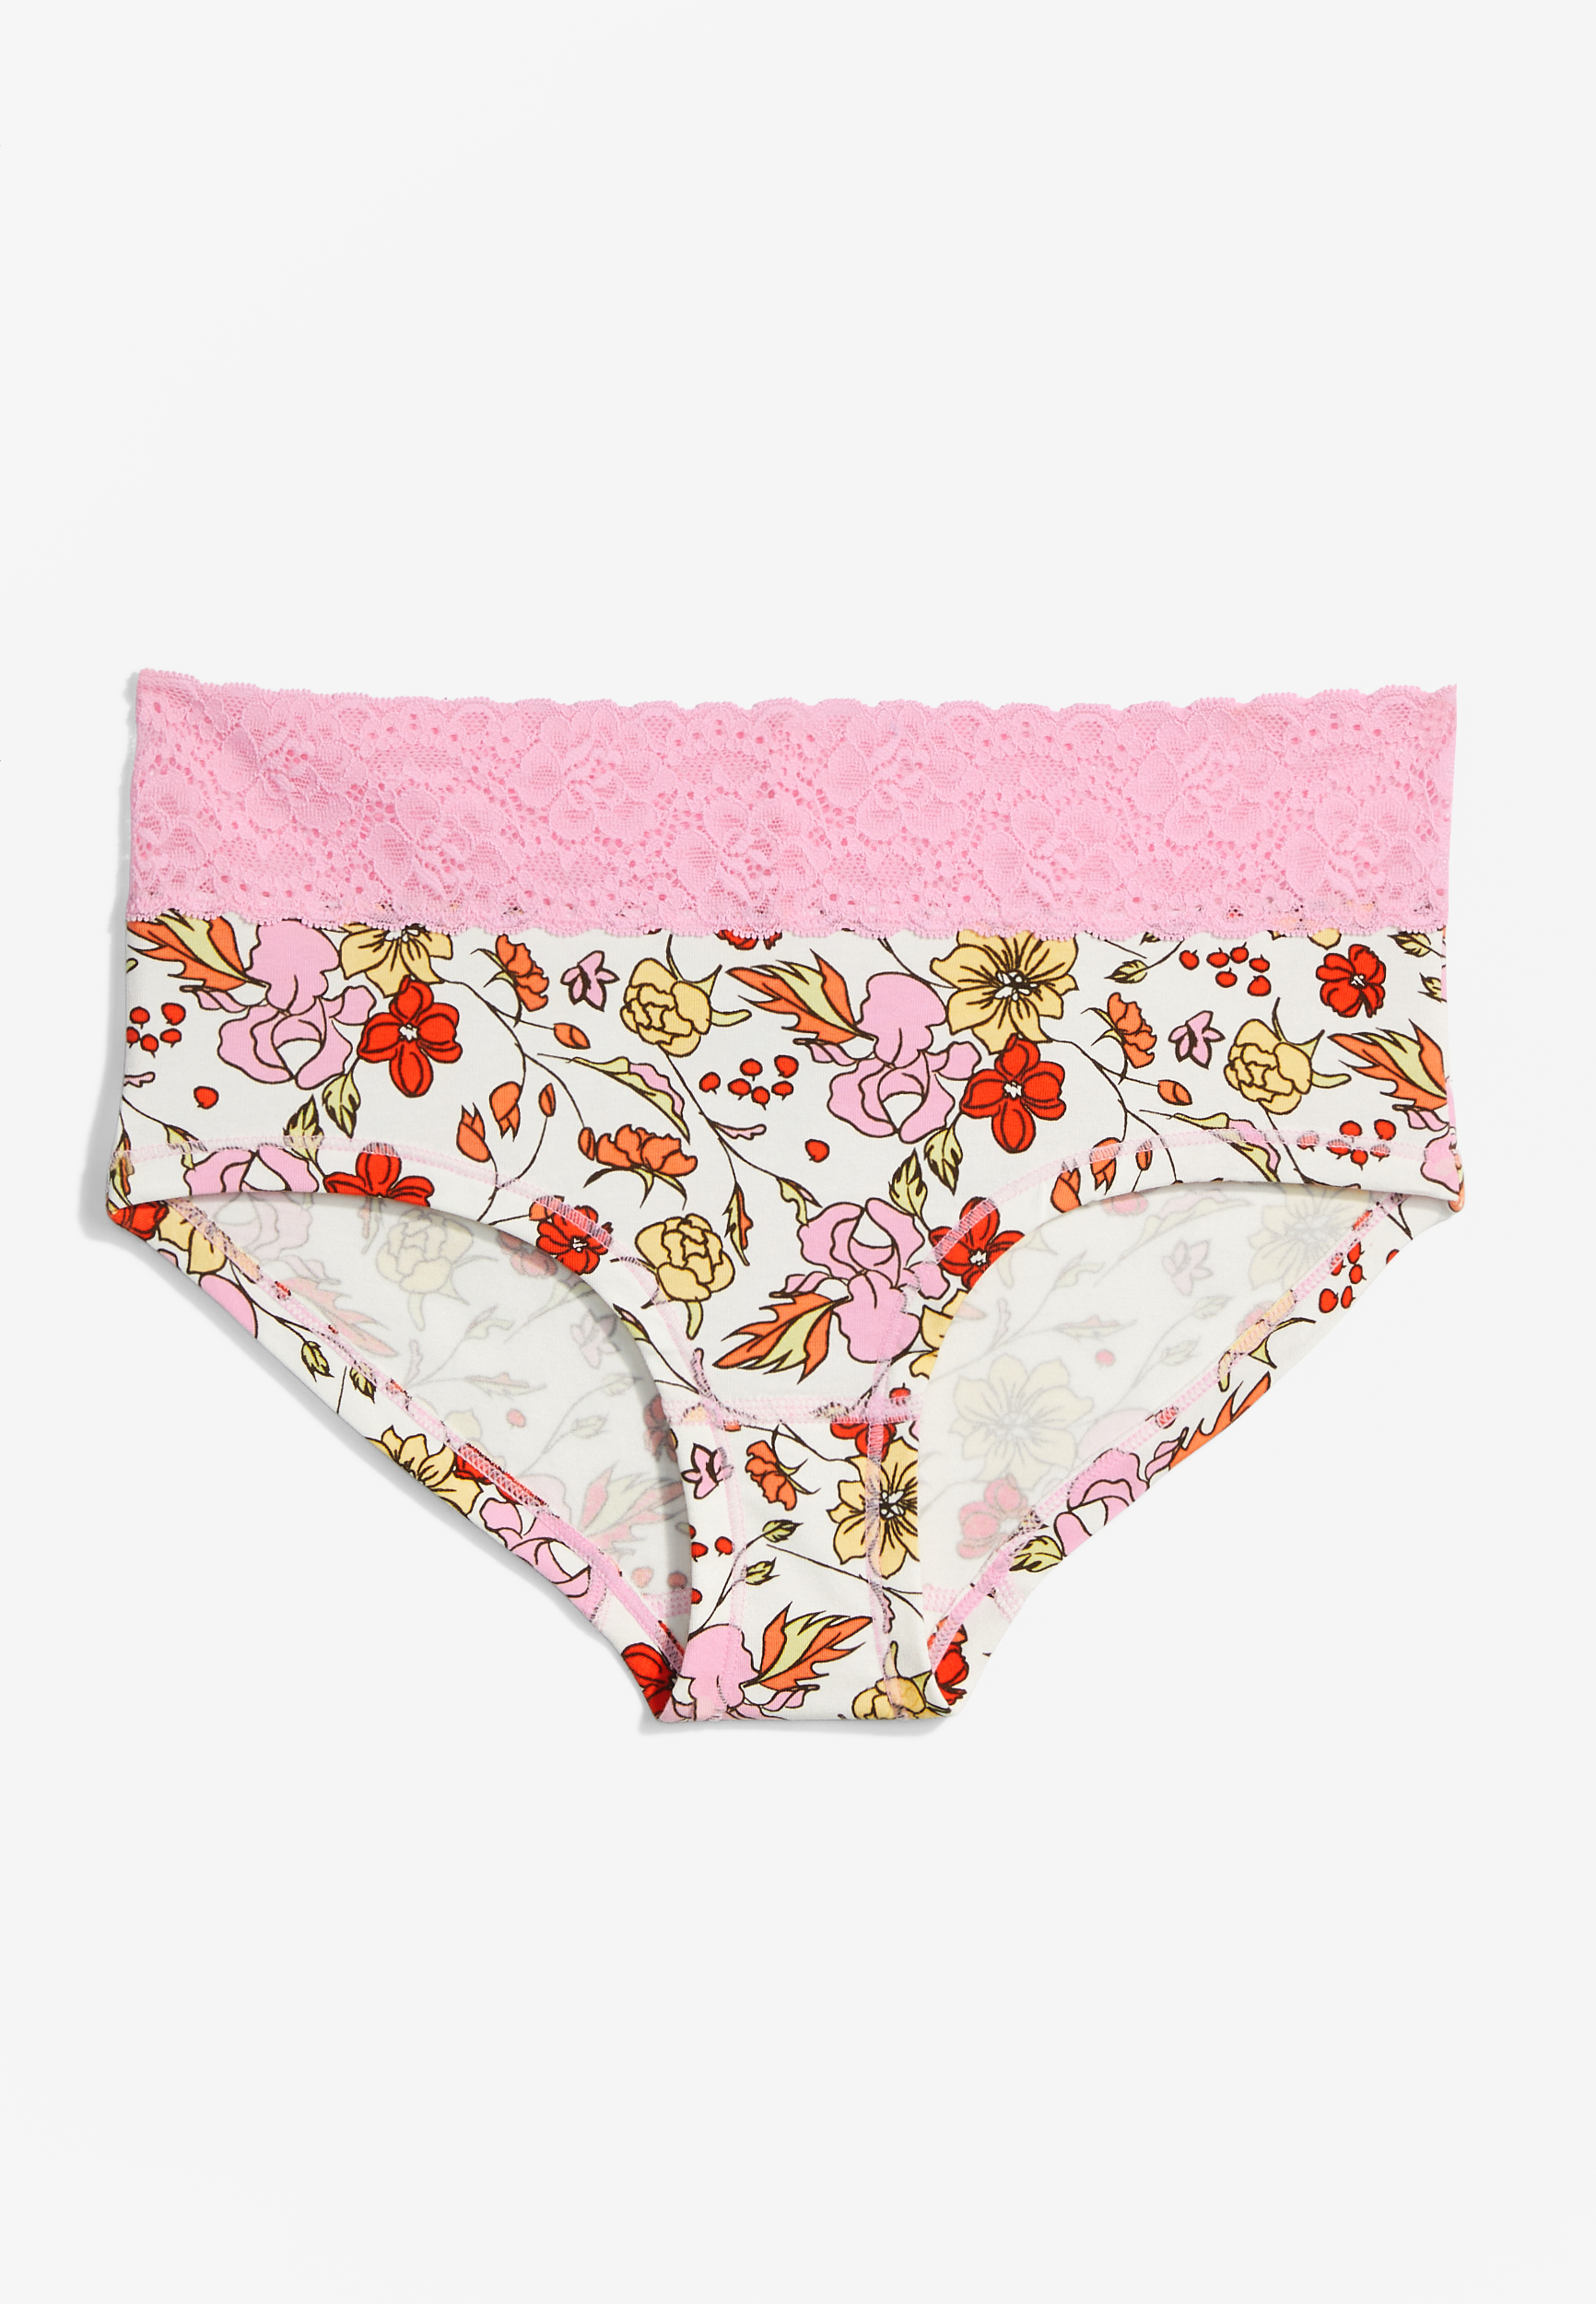 knickers PIMPRENELLE Vintage pink liberty cotton - Boho-Chic Clothing